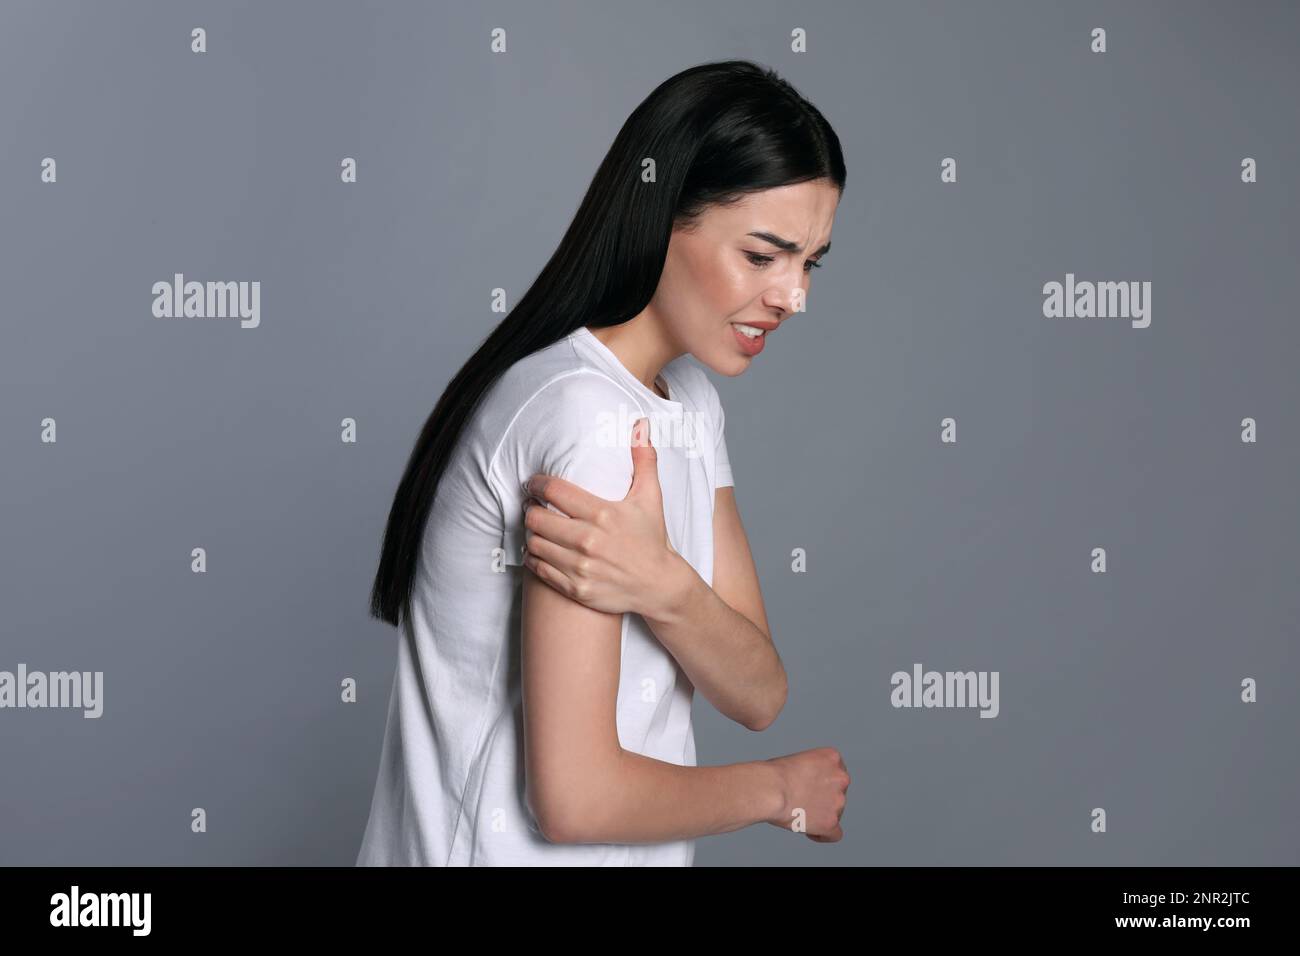 Woman suffering from shoulder pain on grey background Stock Photo